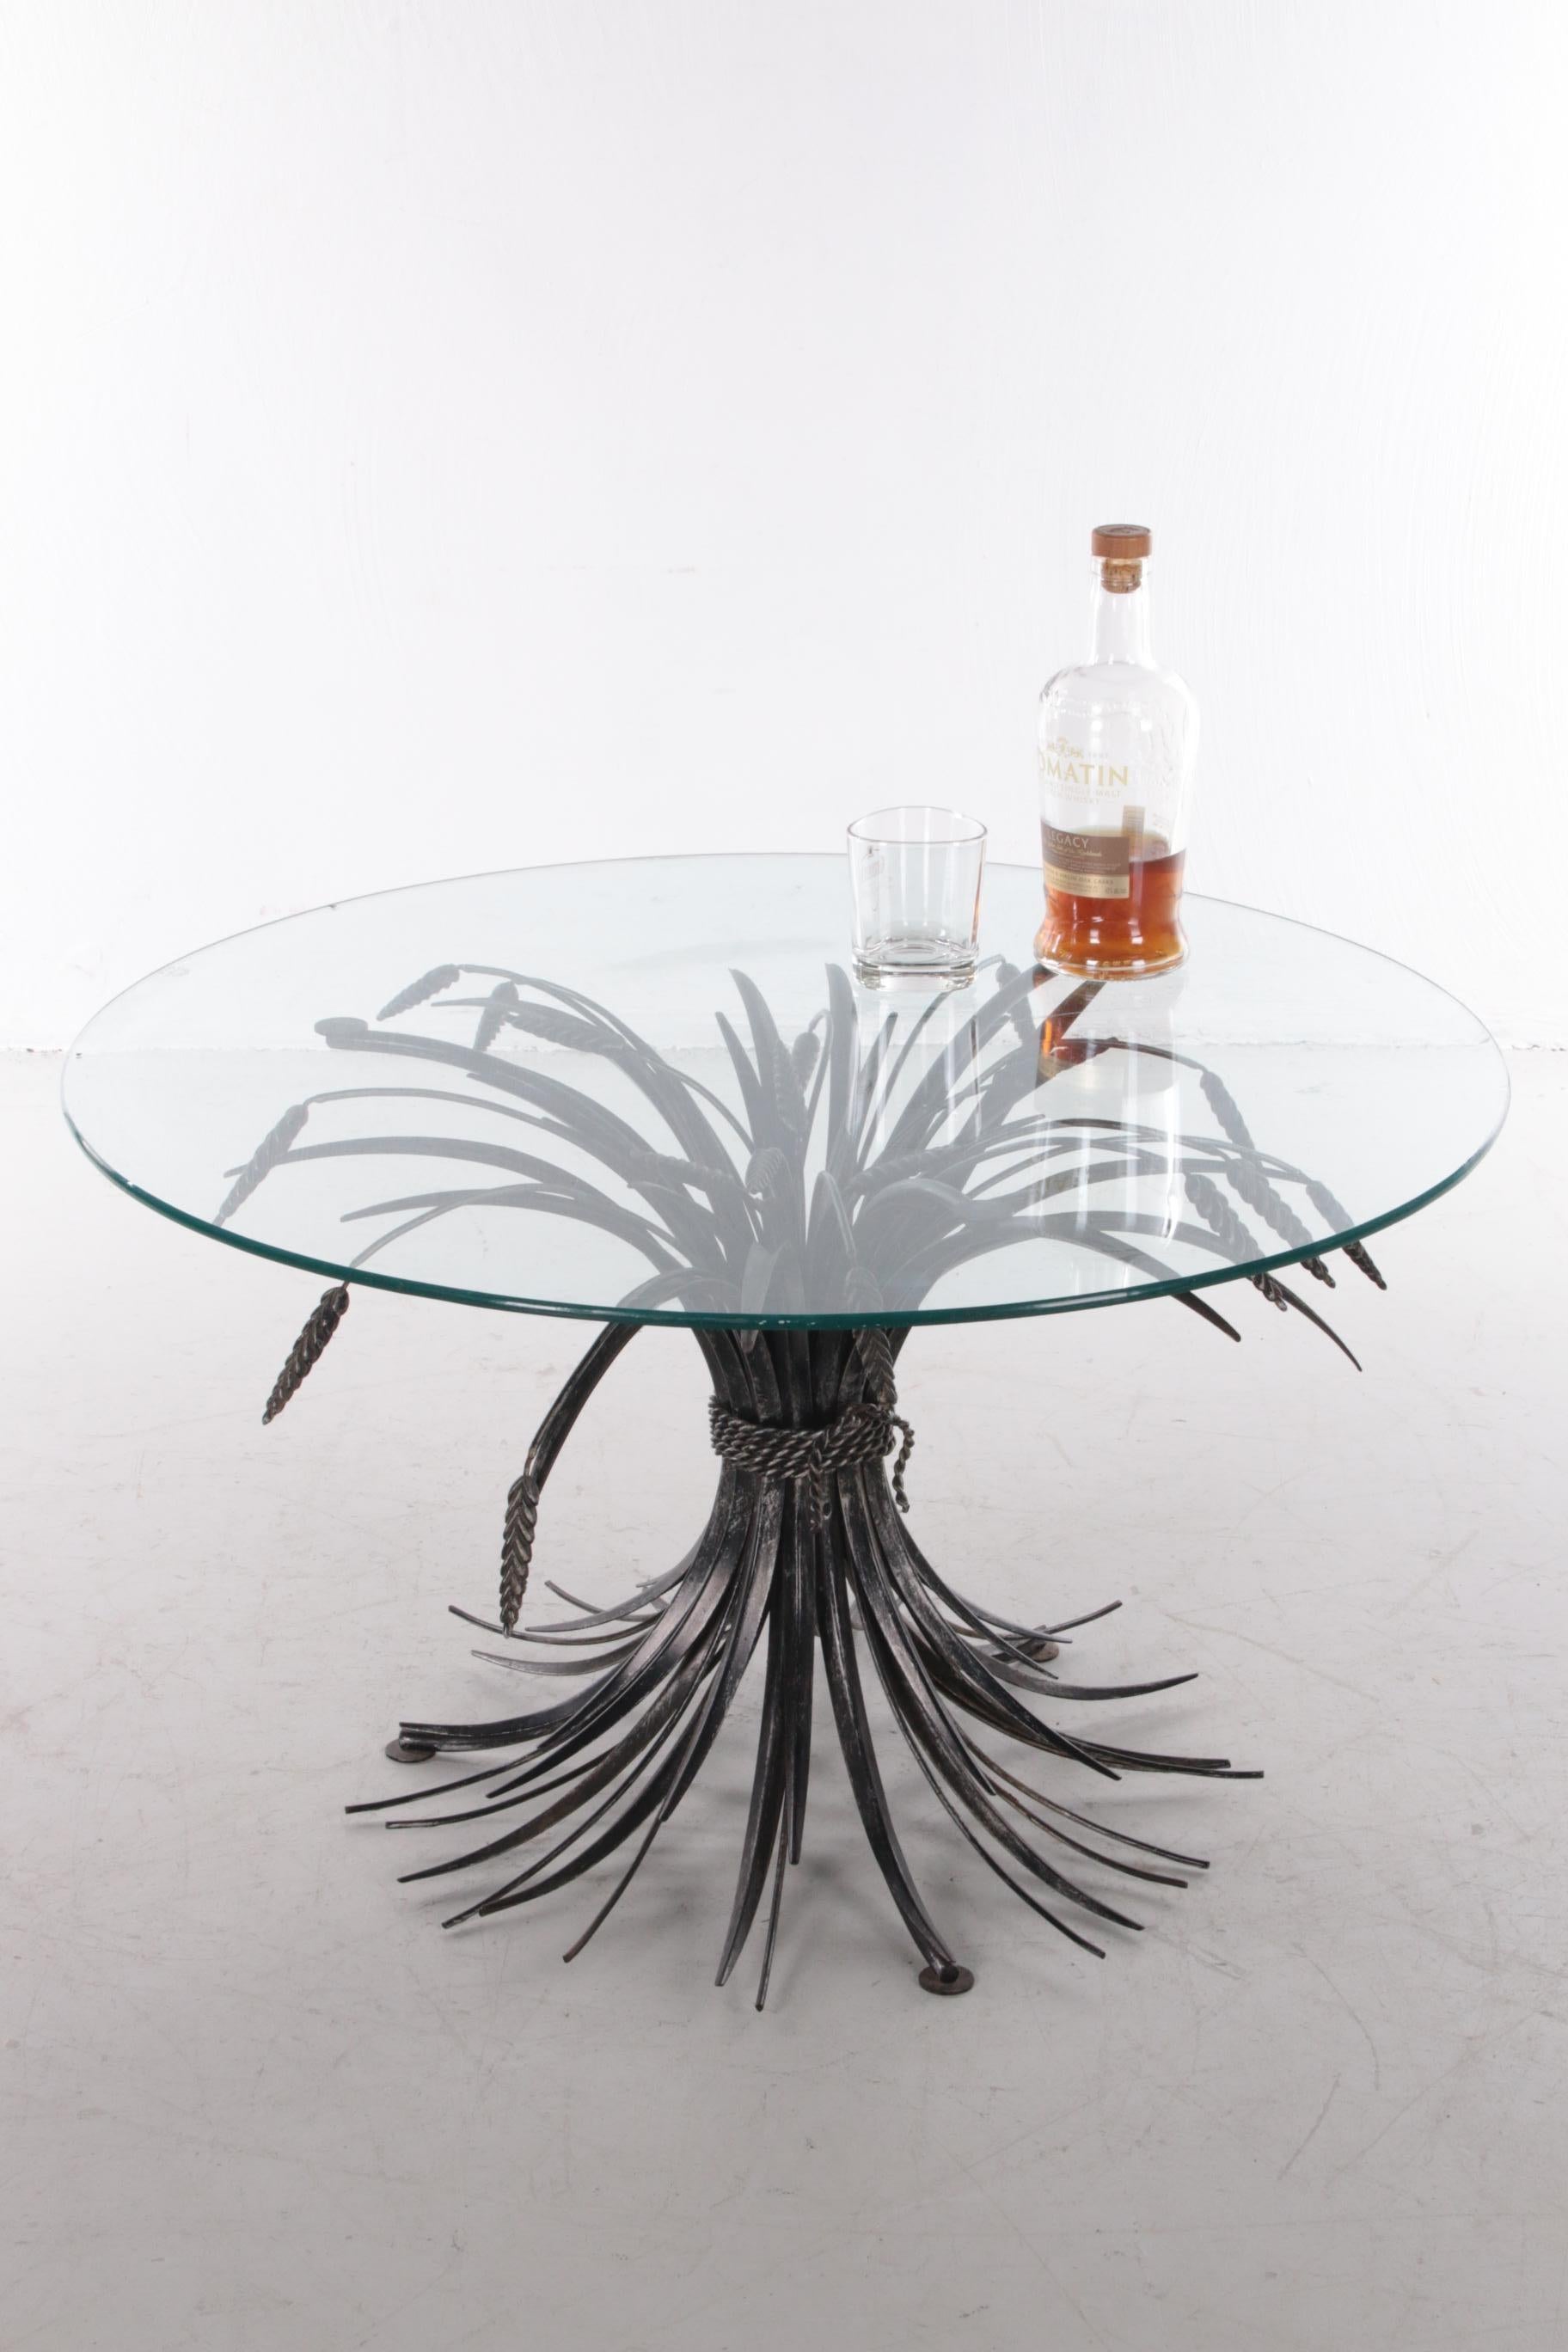 Hollywood Regency Coco chanel coffee table Hans Kogl, 1970.


Great design Coco Chanel / Hollywood Regency coffee table designed by Hans Kögl from the 1970s.
Bound sheaves of wheat surmounted by a glass top.
The table is in beautiful vintage